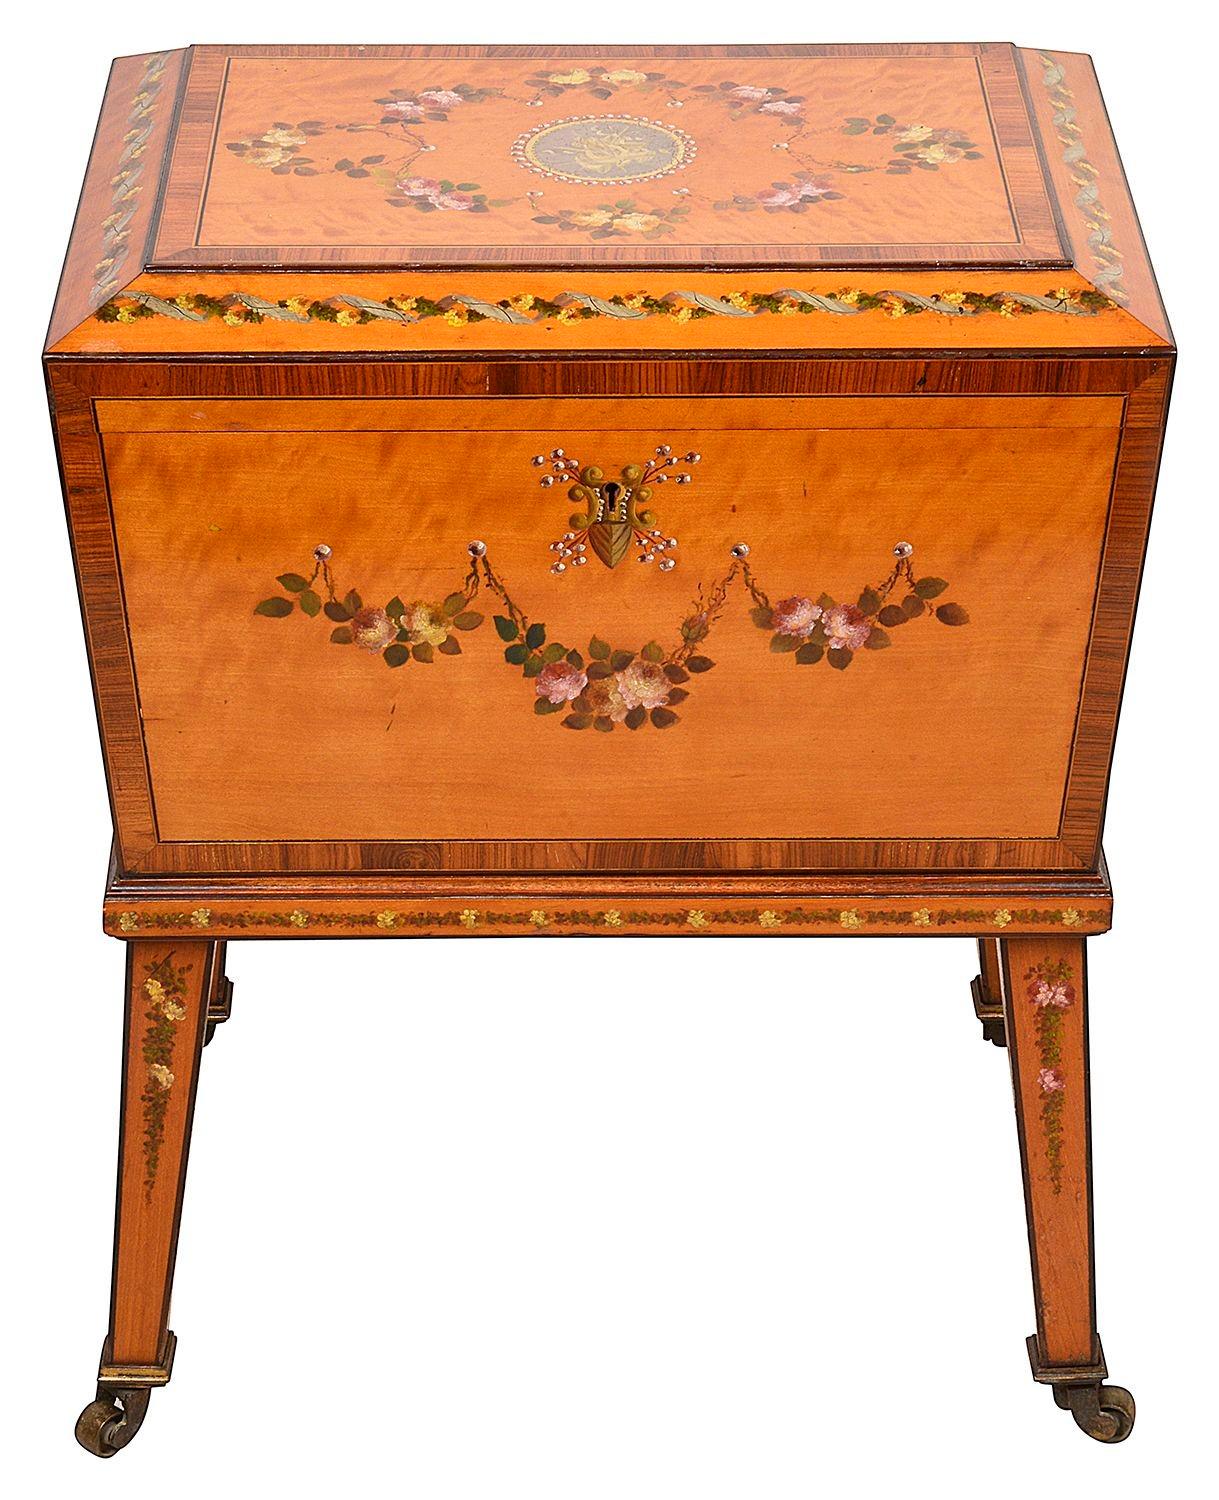 An Edwardian period, Sheraton revival satinwood and rosewood hand paint cellarette on stand, the top with a ribbon and flower frieze, swagged rose garland and a central medallion with musical instruments  The front with a  swagged floral garland.